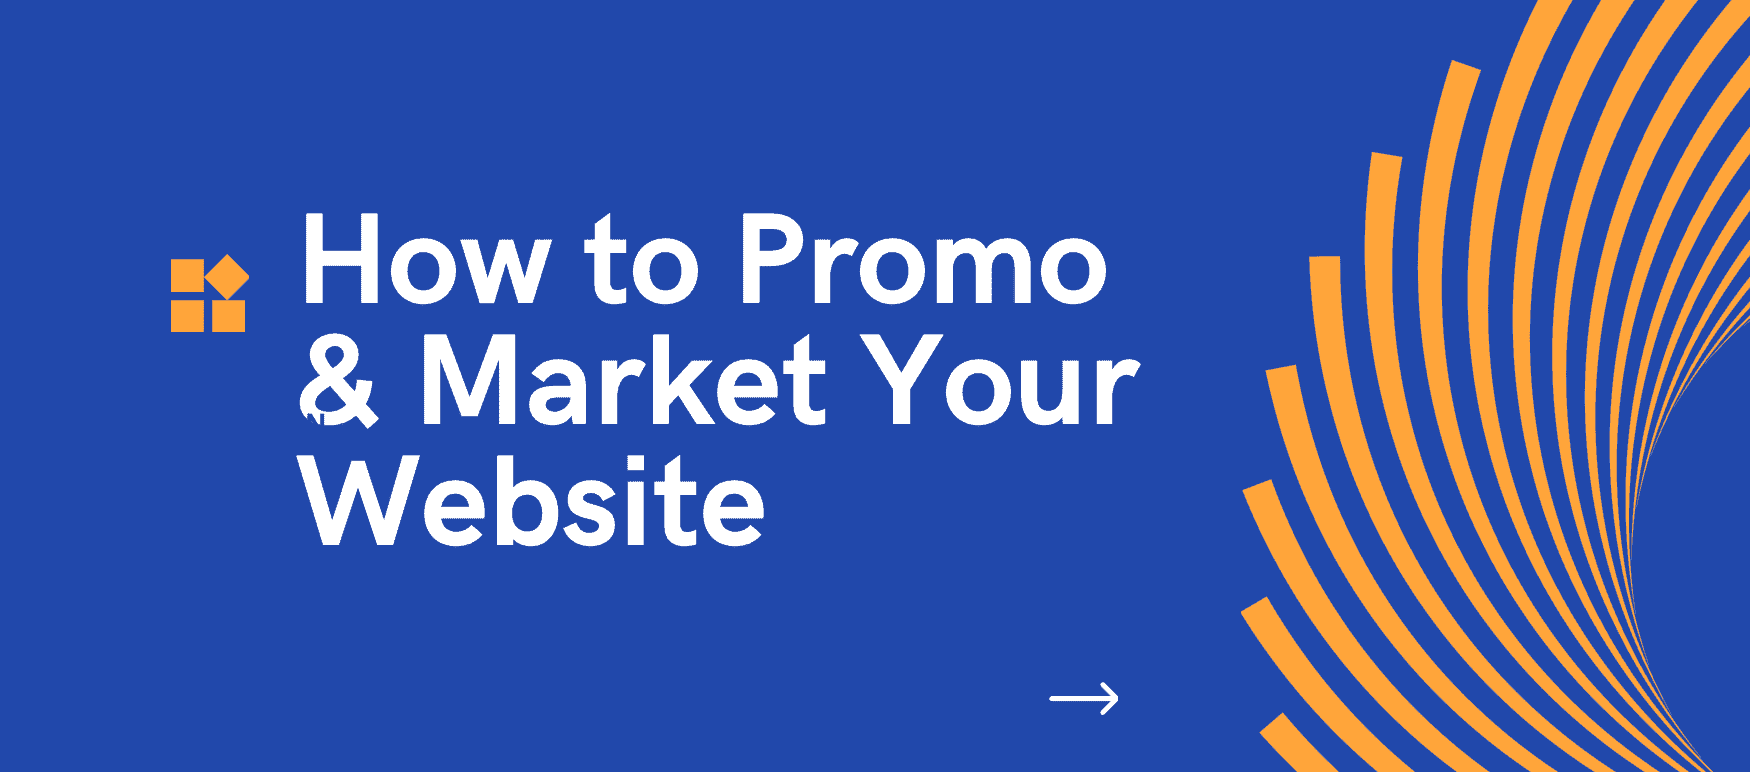 How to Promote Your Website Using 6 Ways